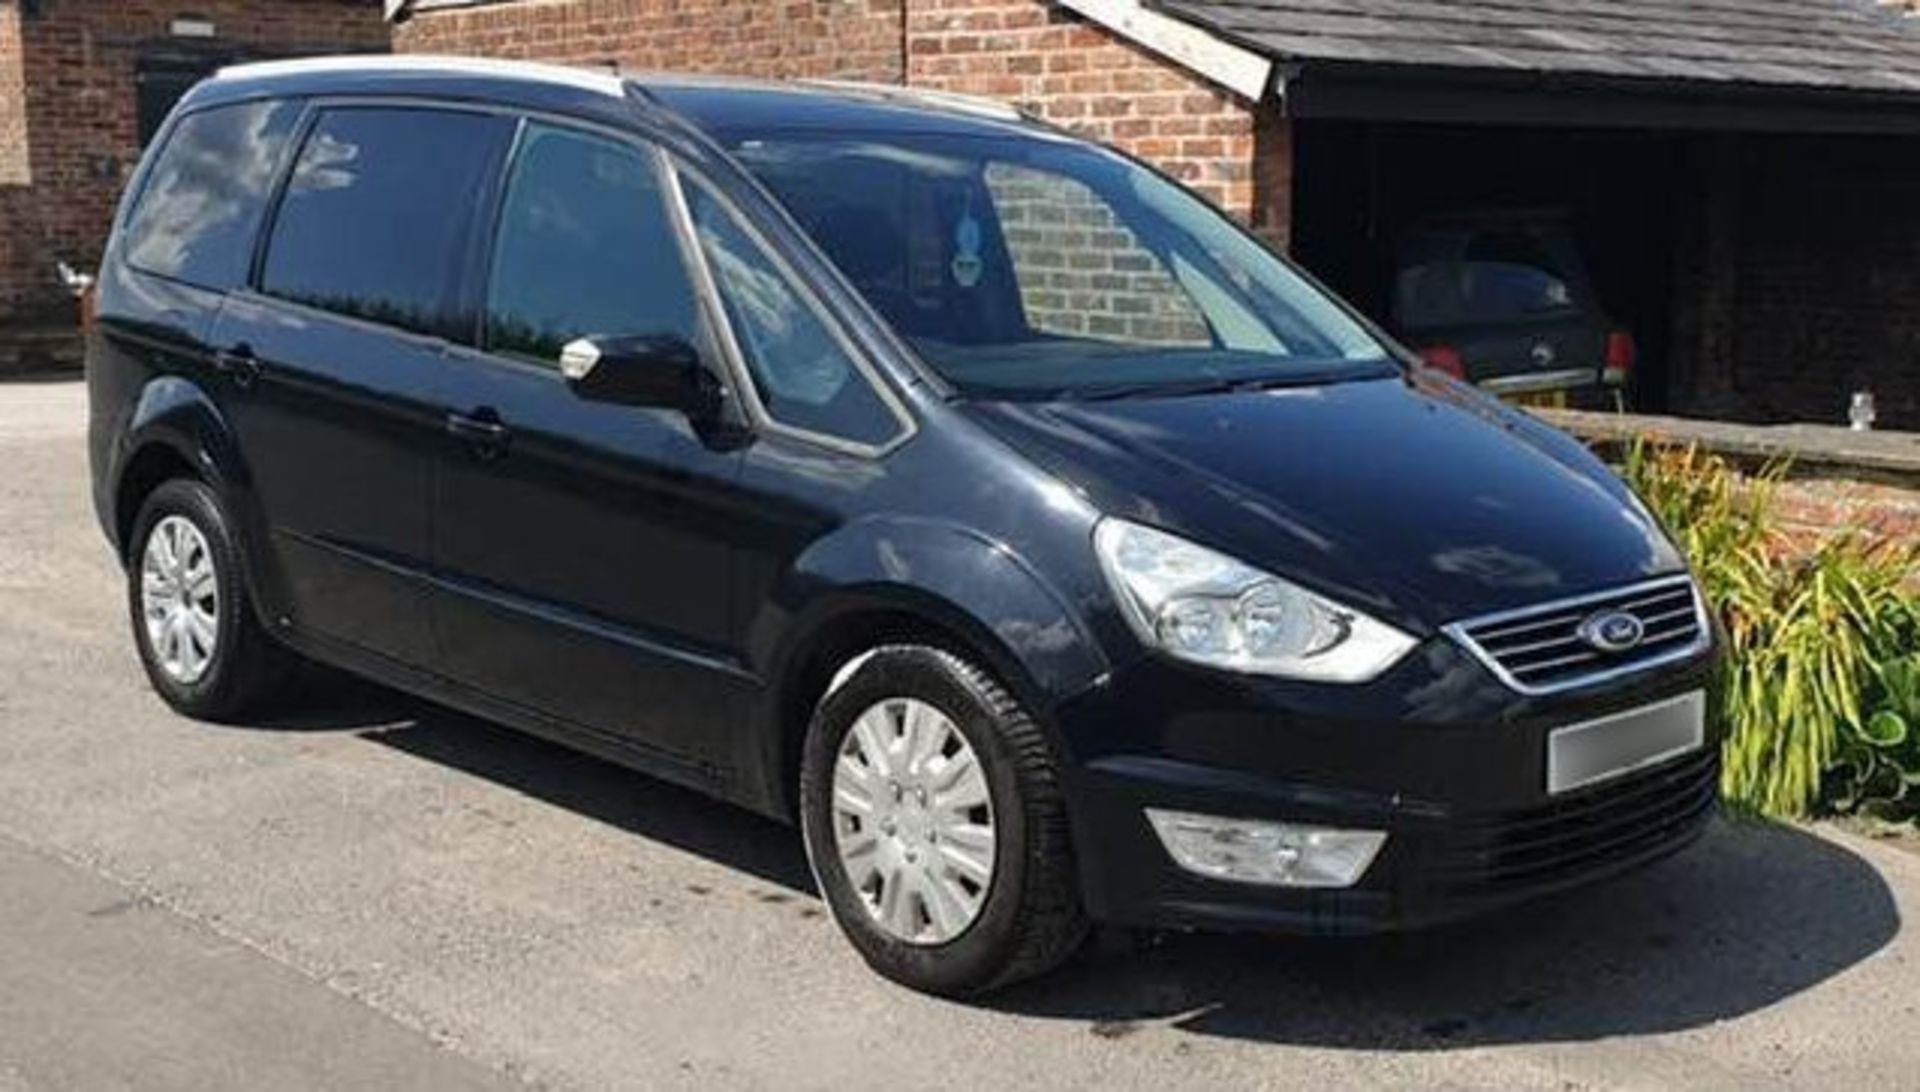 1 x 2014 Ford Galaxy 7-Seater Diesel MPV - Automatic - Black - 126000 Miles - CL331 - Location: - Image 3 of 9